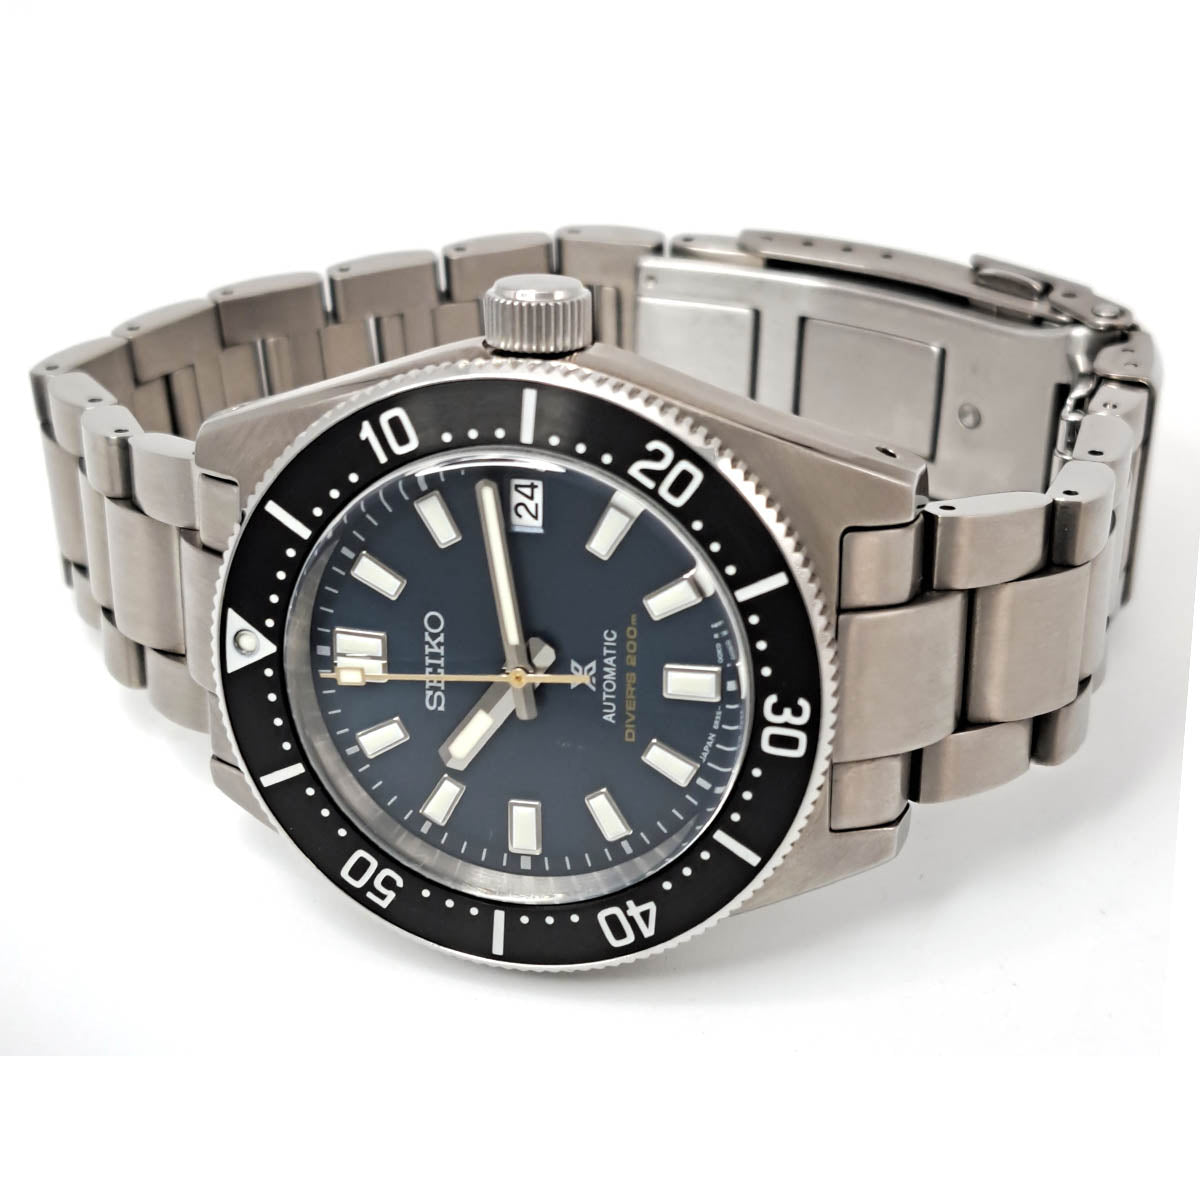 Seiko "Prospex 55th Anniversary Limited" Men's Automatic Wristwatch in Stainless Steel  SBDC107